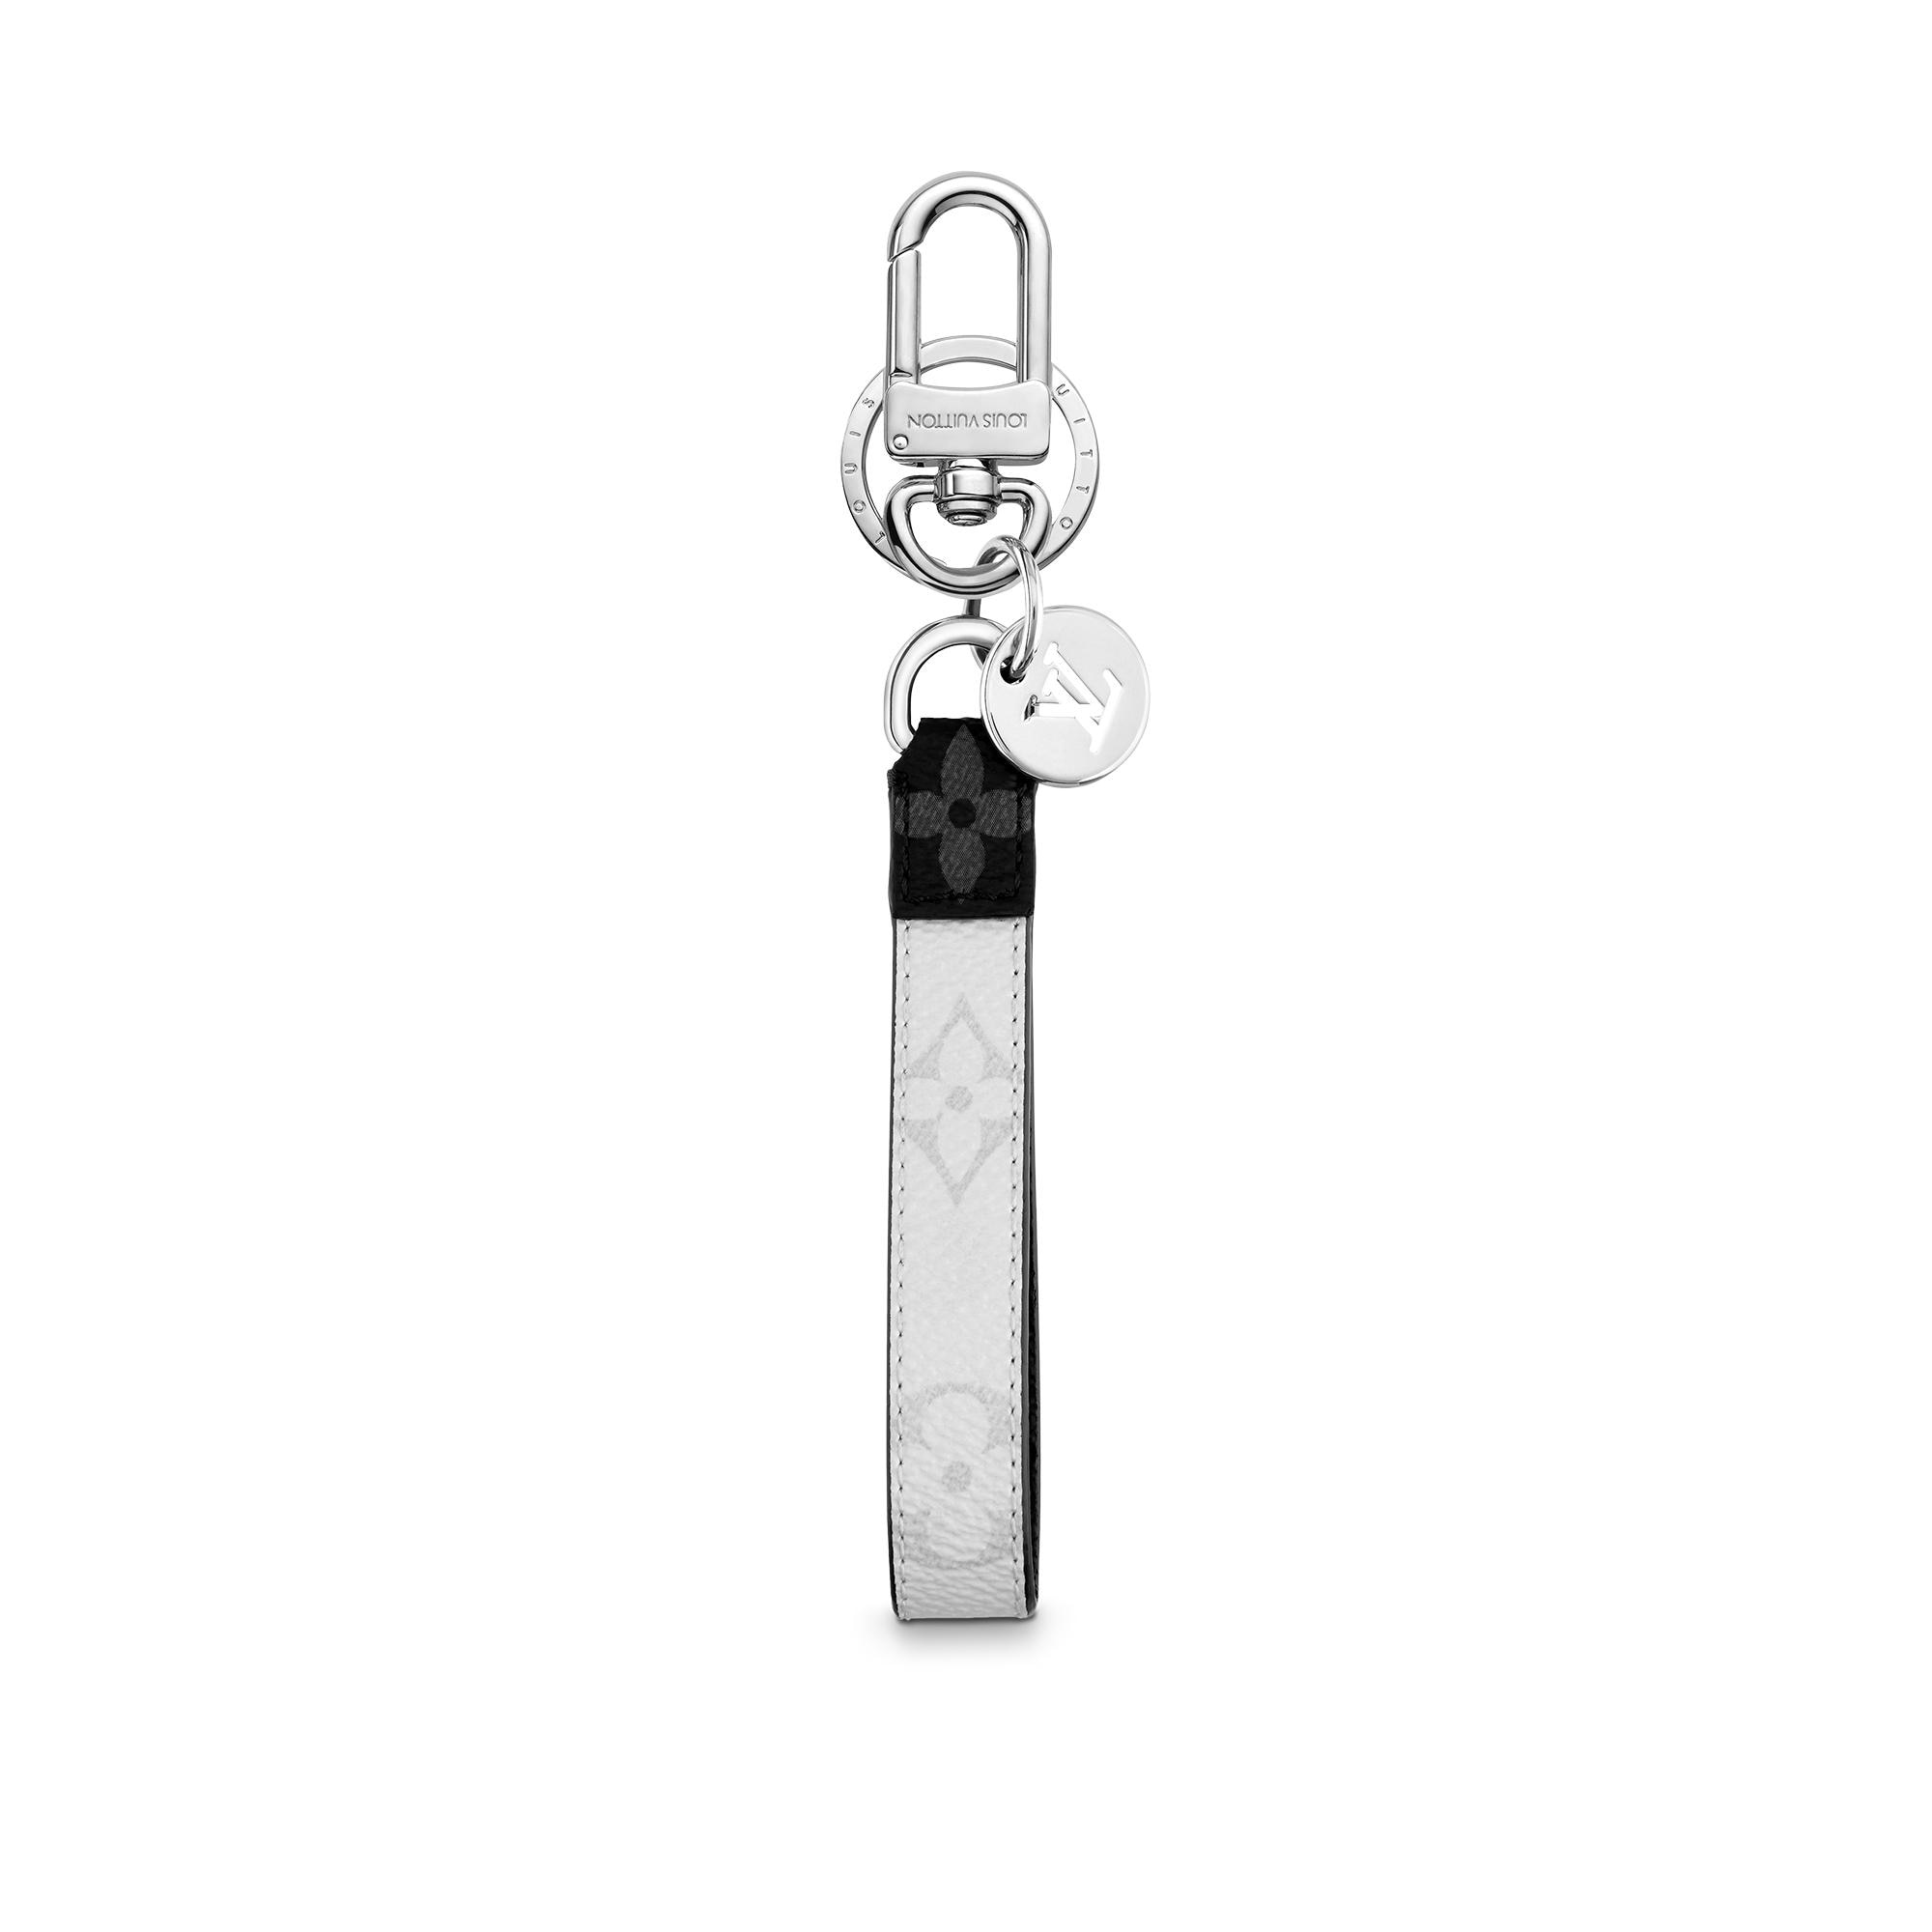 Louis Vuitton Slim Dragonne Bag Charm and Key Holder in White – Accessories M64168